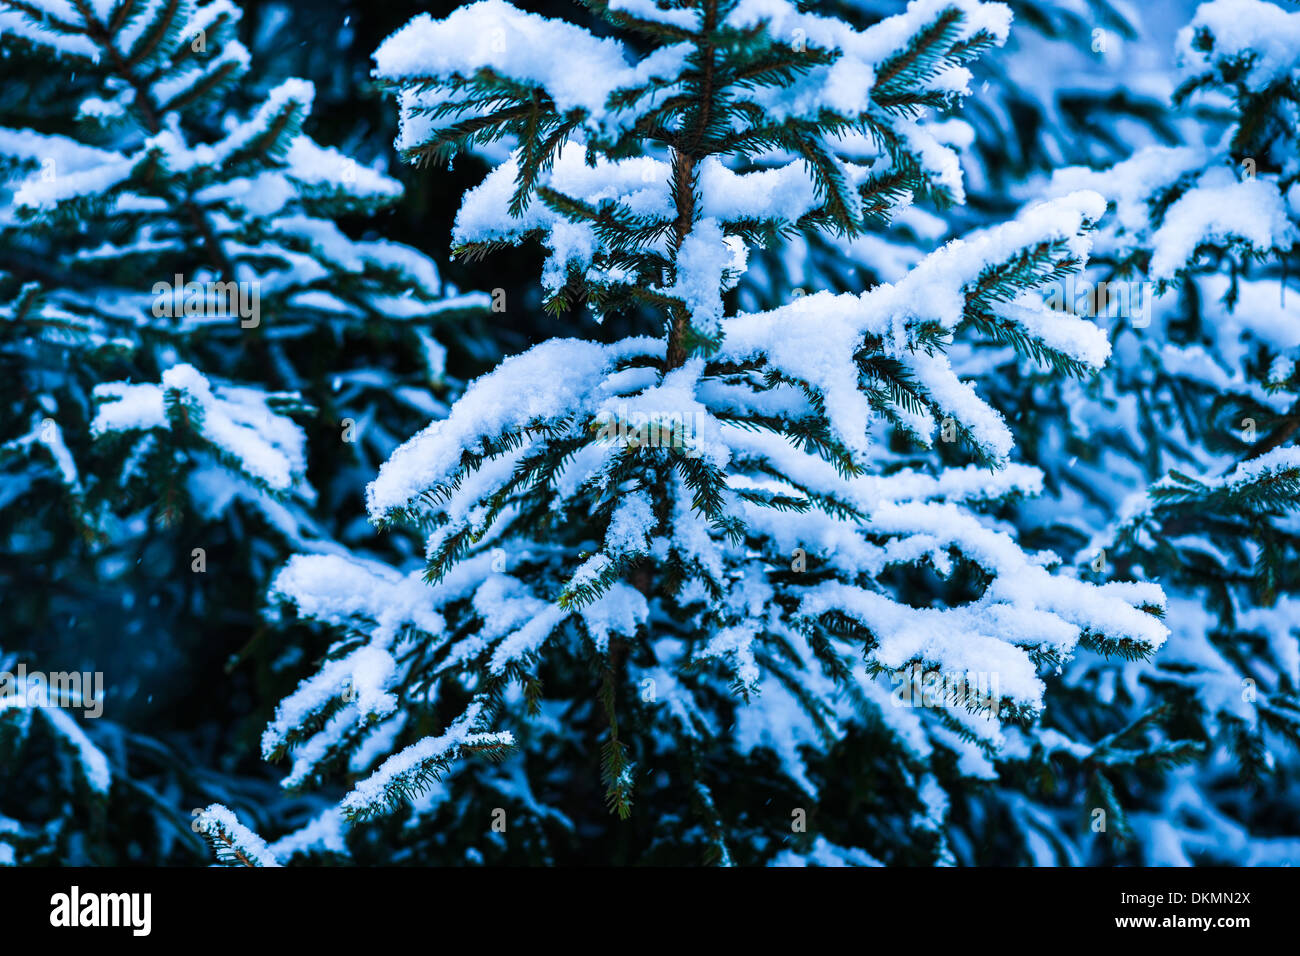 Winter Snow Christmas Tree 7. Fresh snow covered spruce trees in the forest in snowstorm. Dark green, blue and white colors. Stock Photo